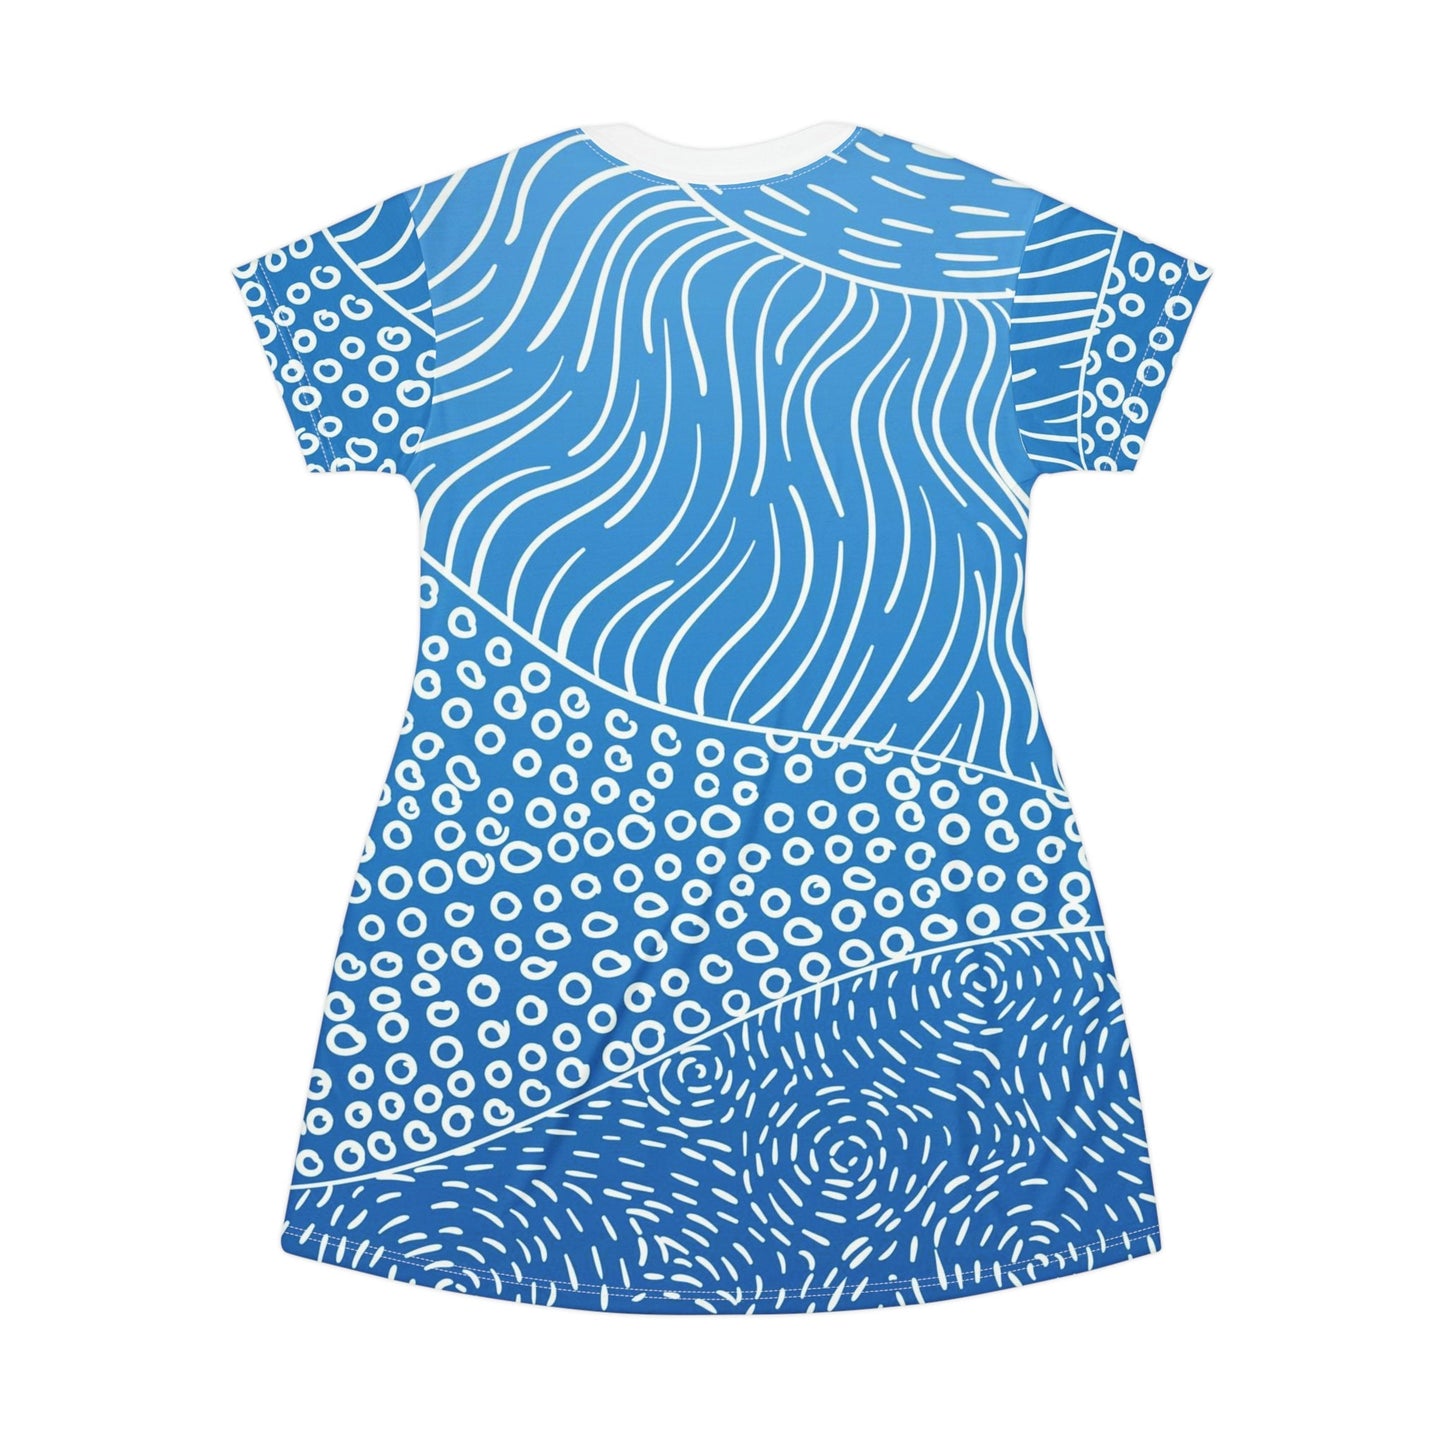 T-Shirt Dress - Blue and White Abstract